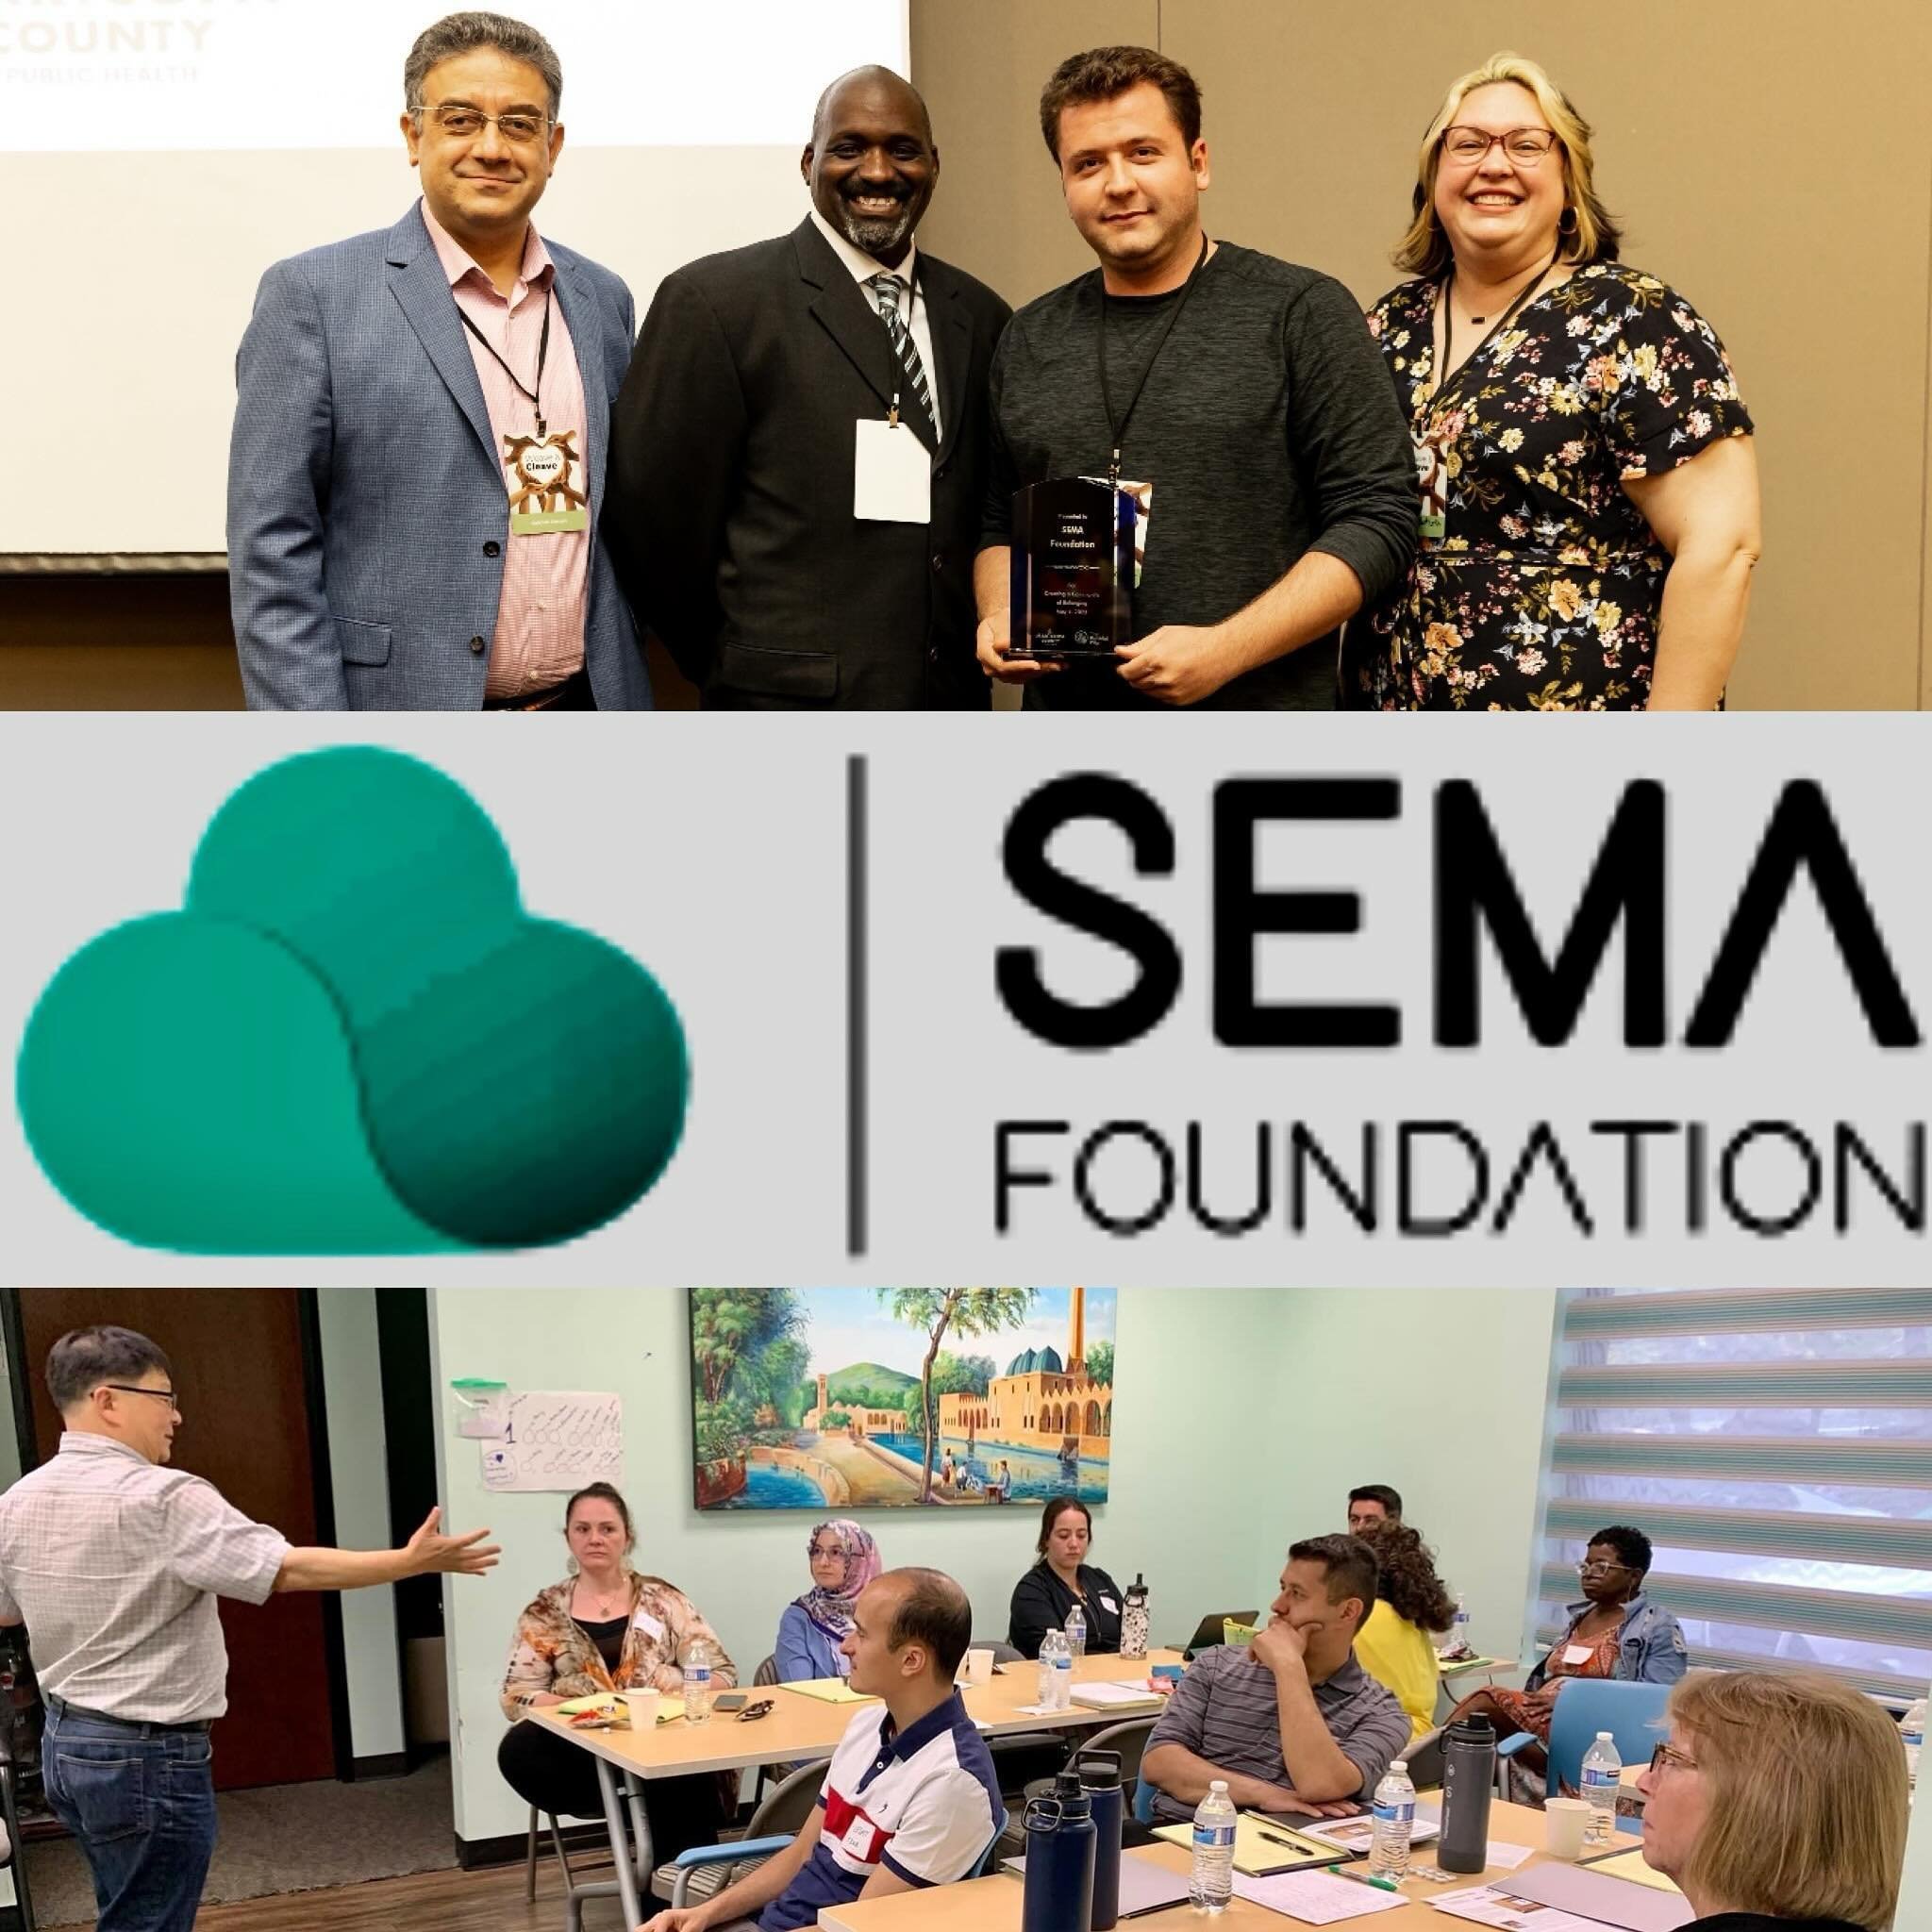 The Faithful City trained SEMA Foundation last year for Creating Communities of Belonging as they received the recognition award from Maricopa County Department of Public Health. The follow up journey is happening this weekend. Here&rsquo;s CEO Gokha